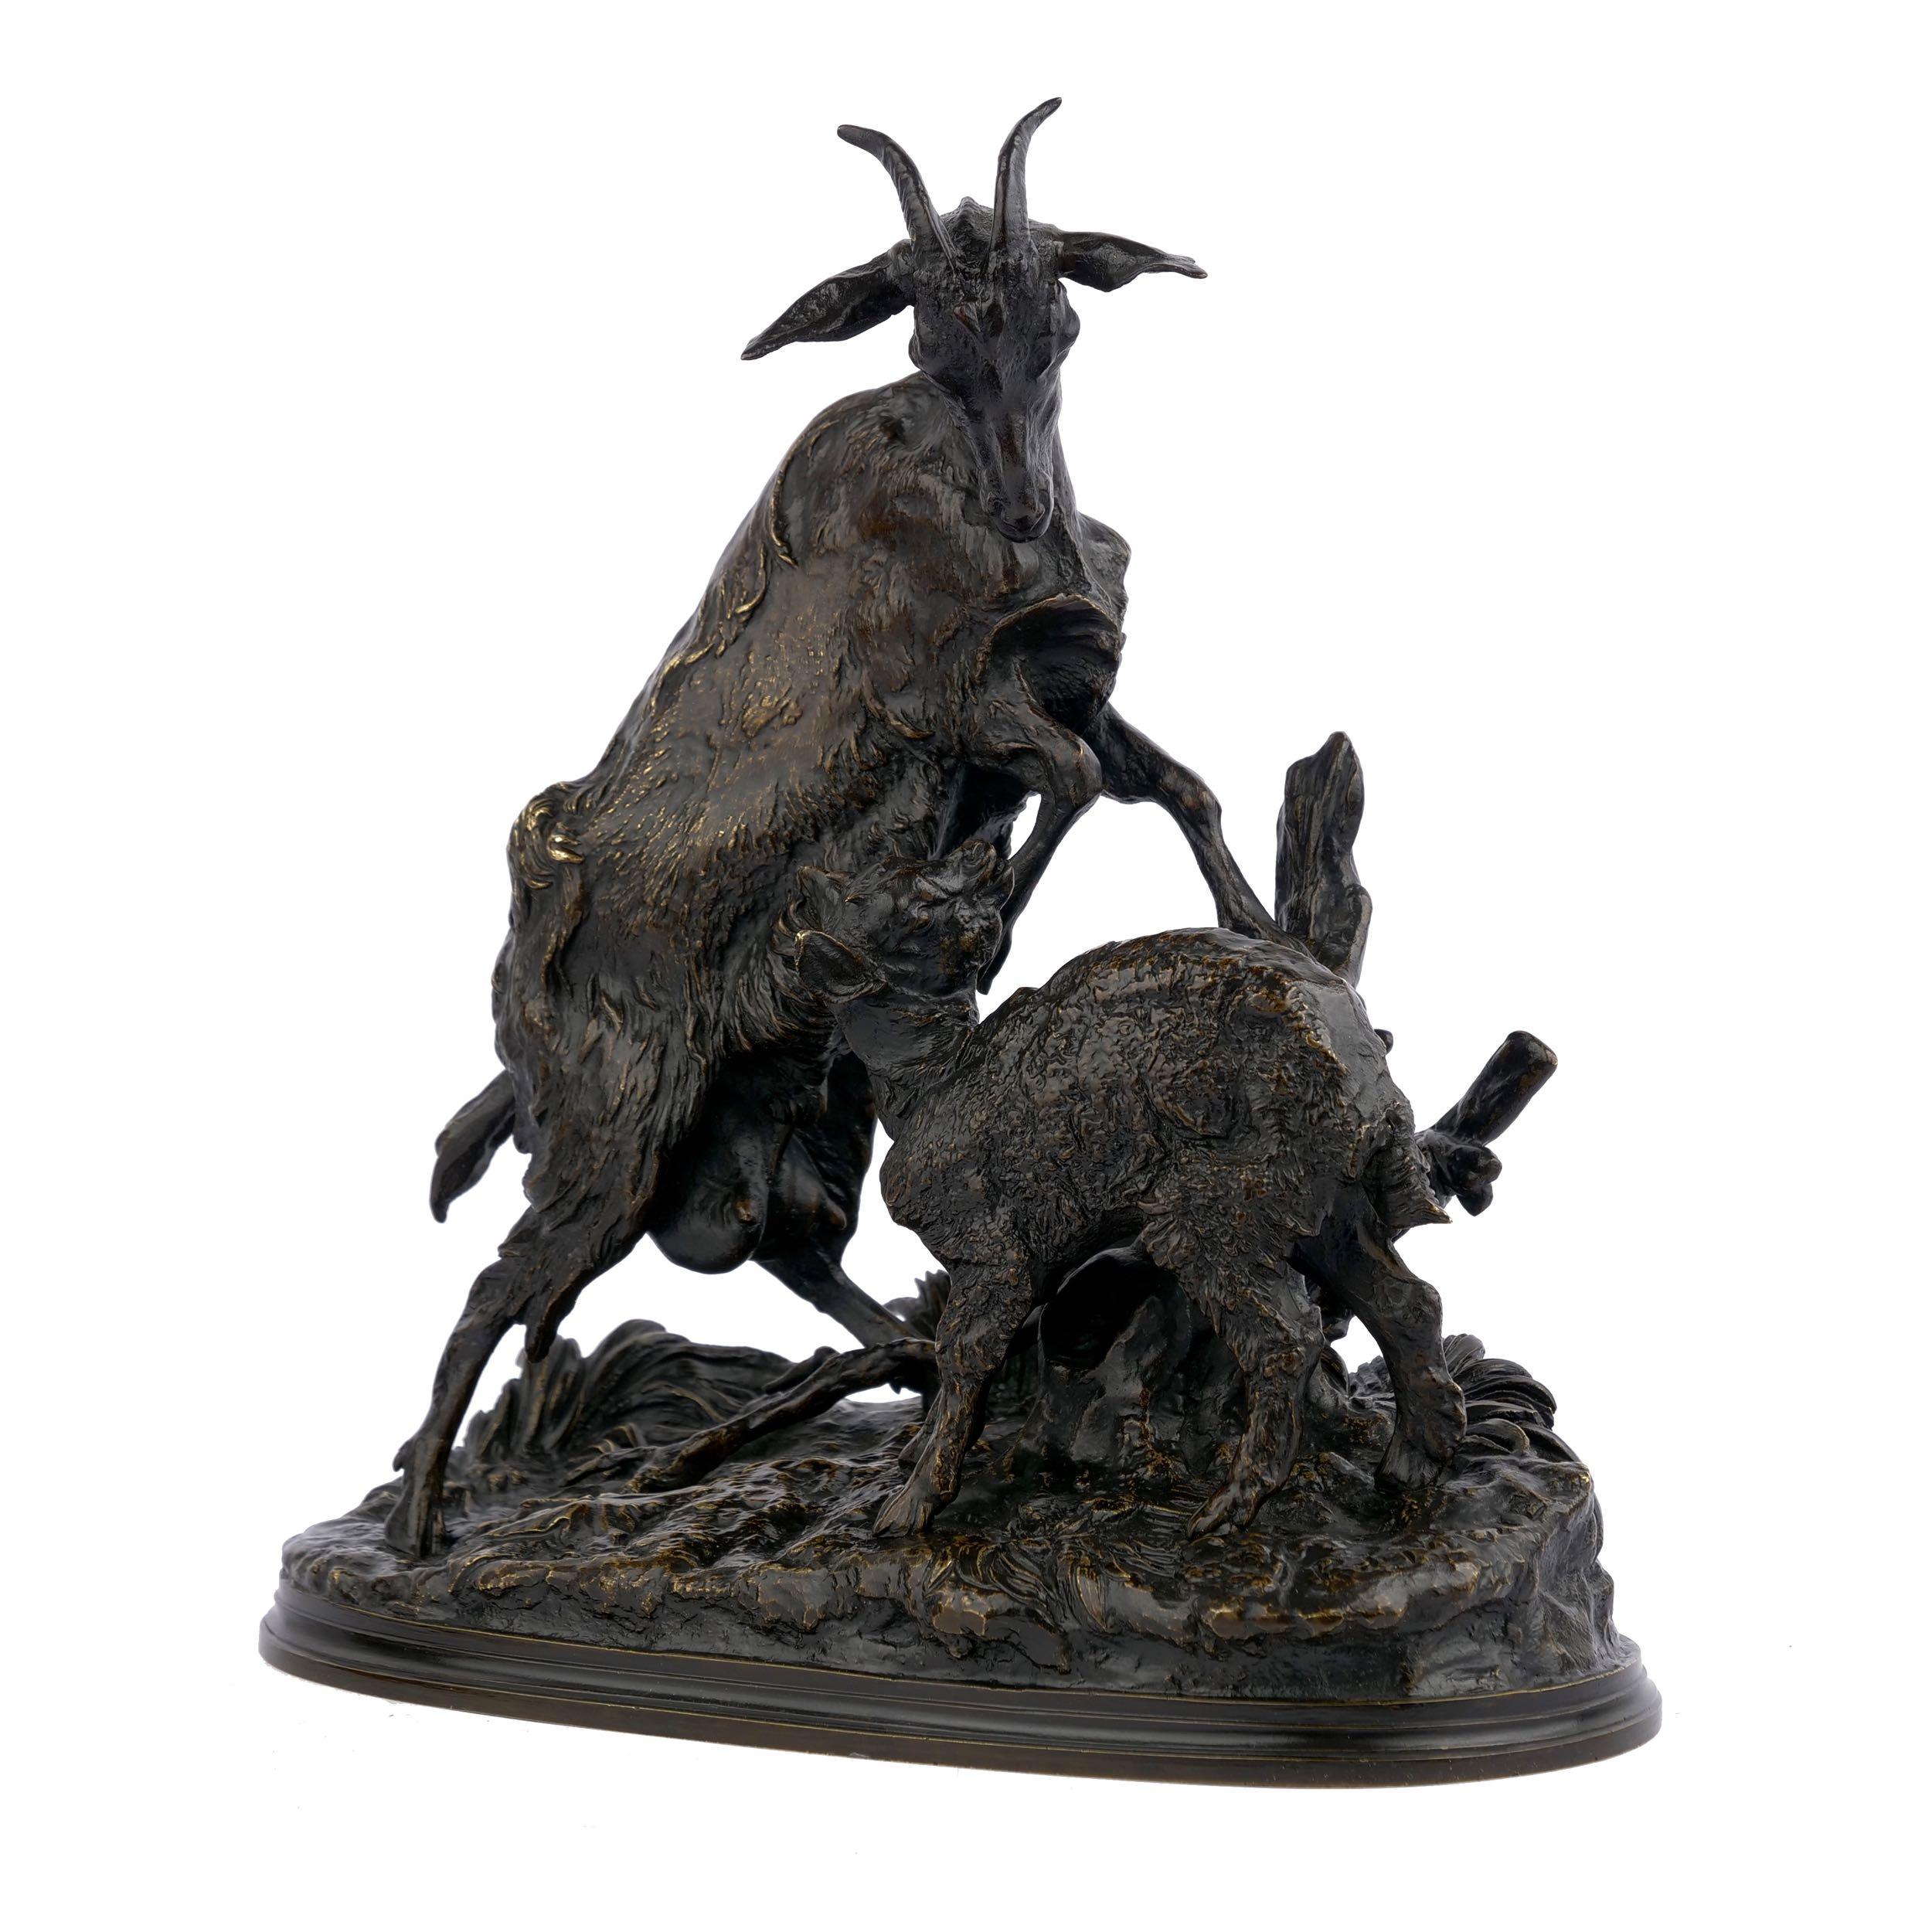 A rare and exceptional model of La Chévre et le Chevreau (The Nanny Goat and her Kid) by Pierre-Jules Mene, it retains an exquisite original patina with complex variations from greens to blacks, warmer hues of brown and golden brassy highlights. The